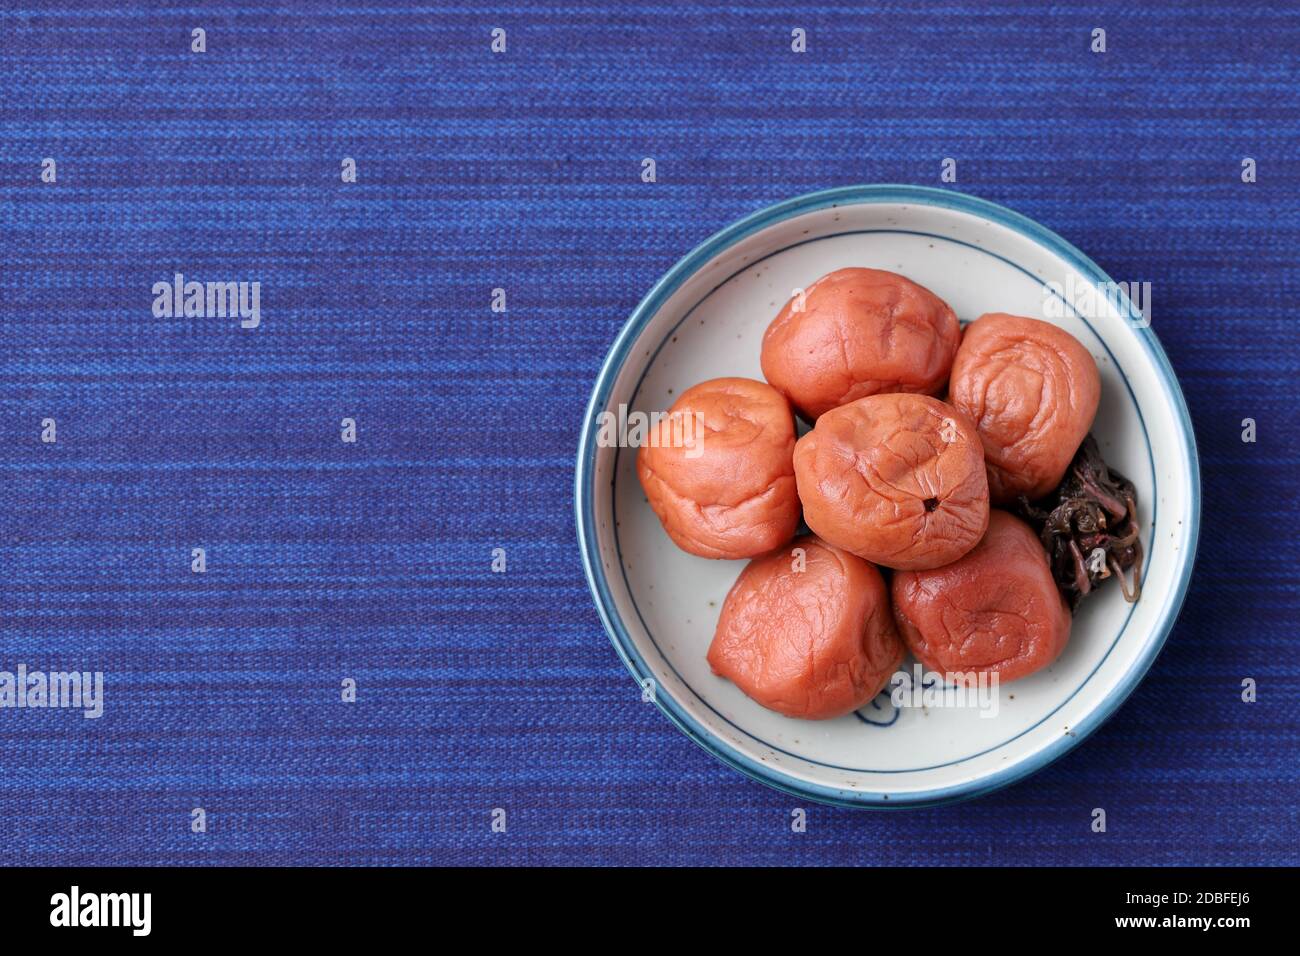 Japanese food, pickled Umeboshi in a dish on table, top view Stock Photo